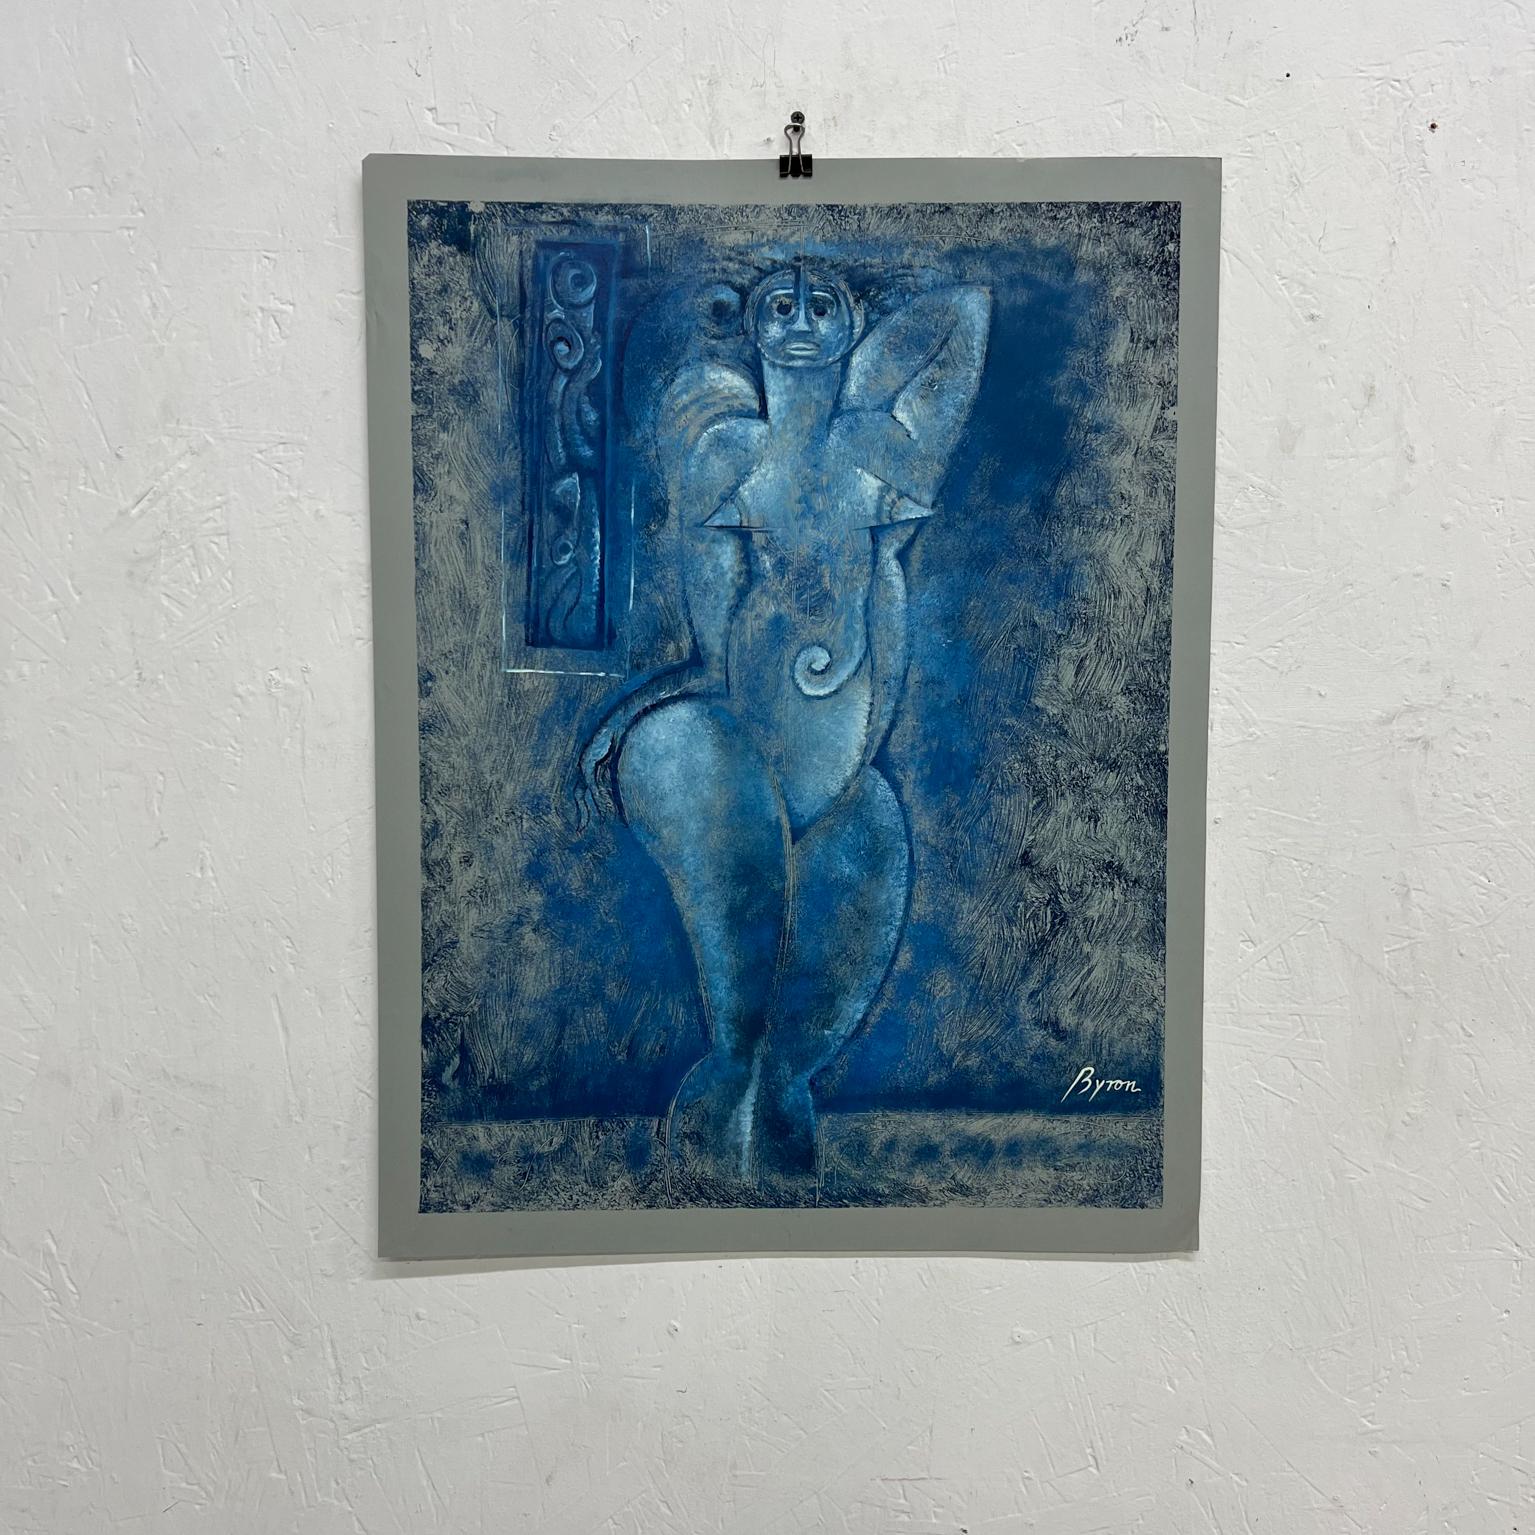 Byron Gálvez Mexican modernism artwork blue mixed media on paper
Byron mix media
Measures: 25.75 x 19.75
Preowned vintage art unrestored
See images provided.
  